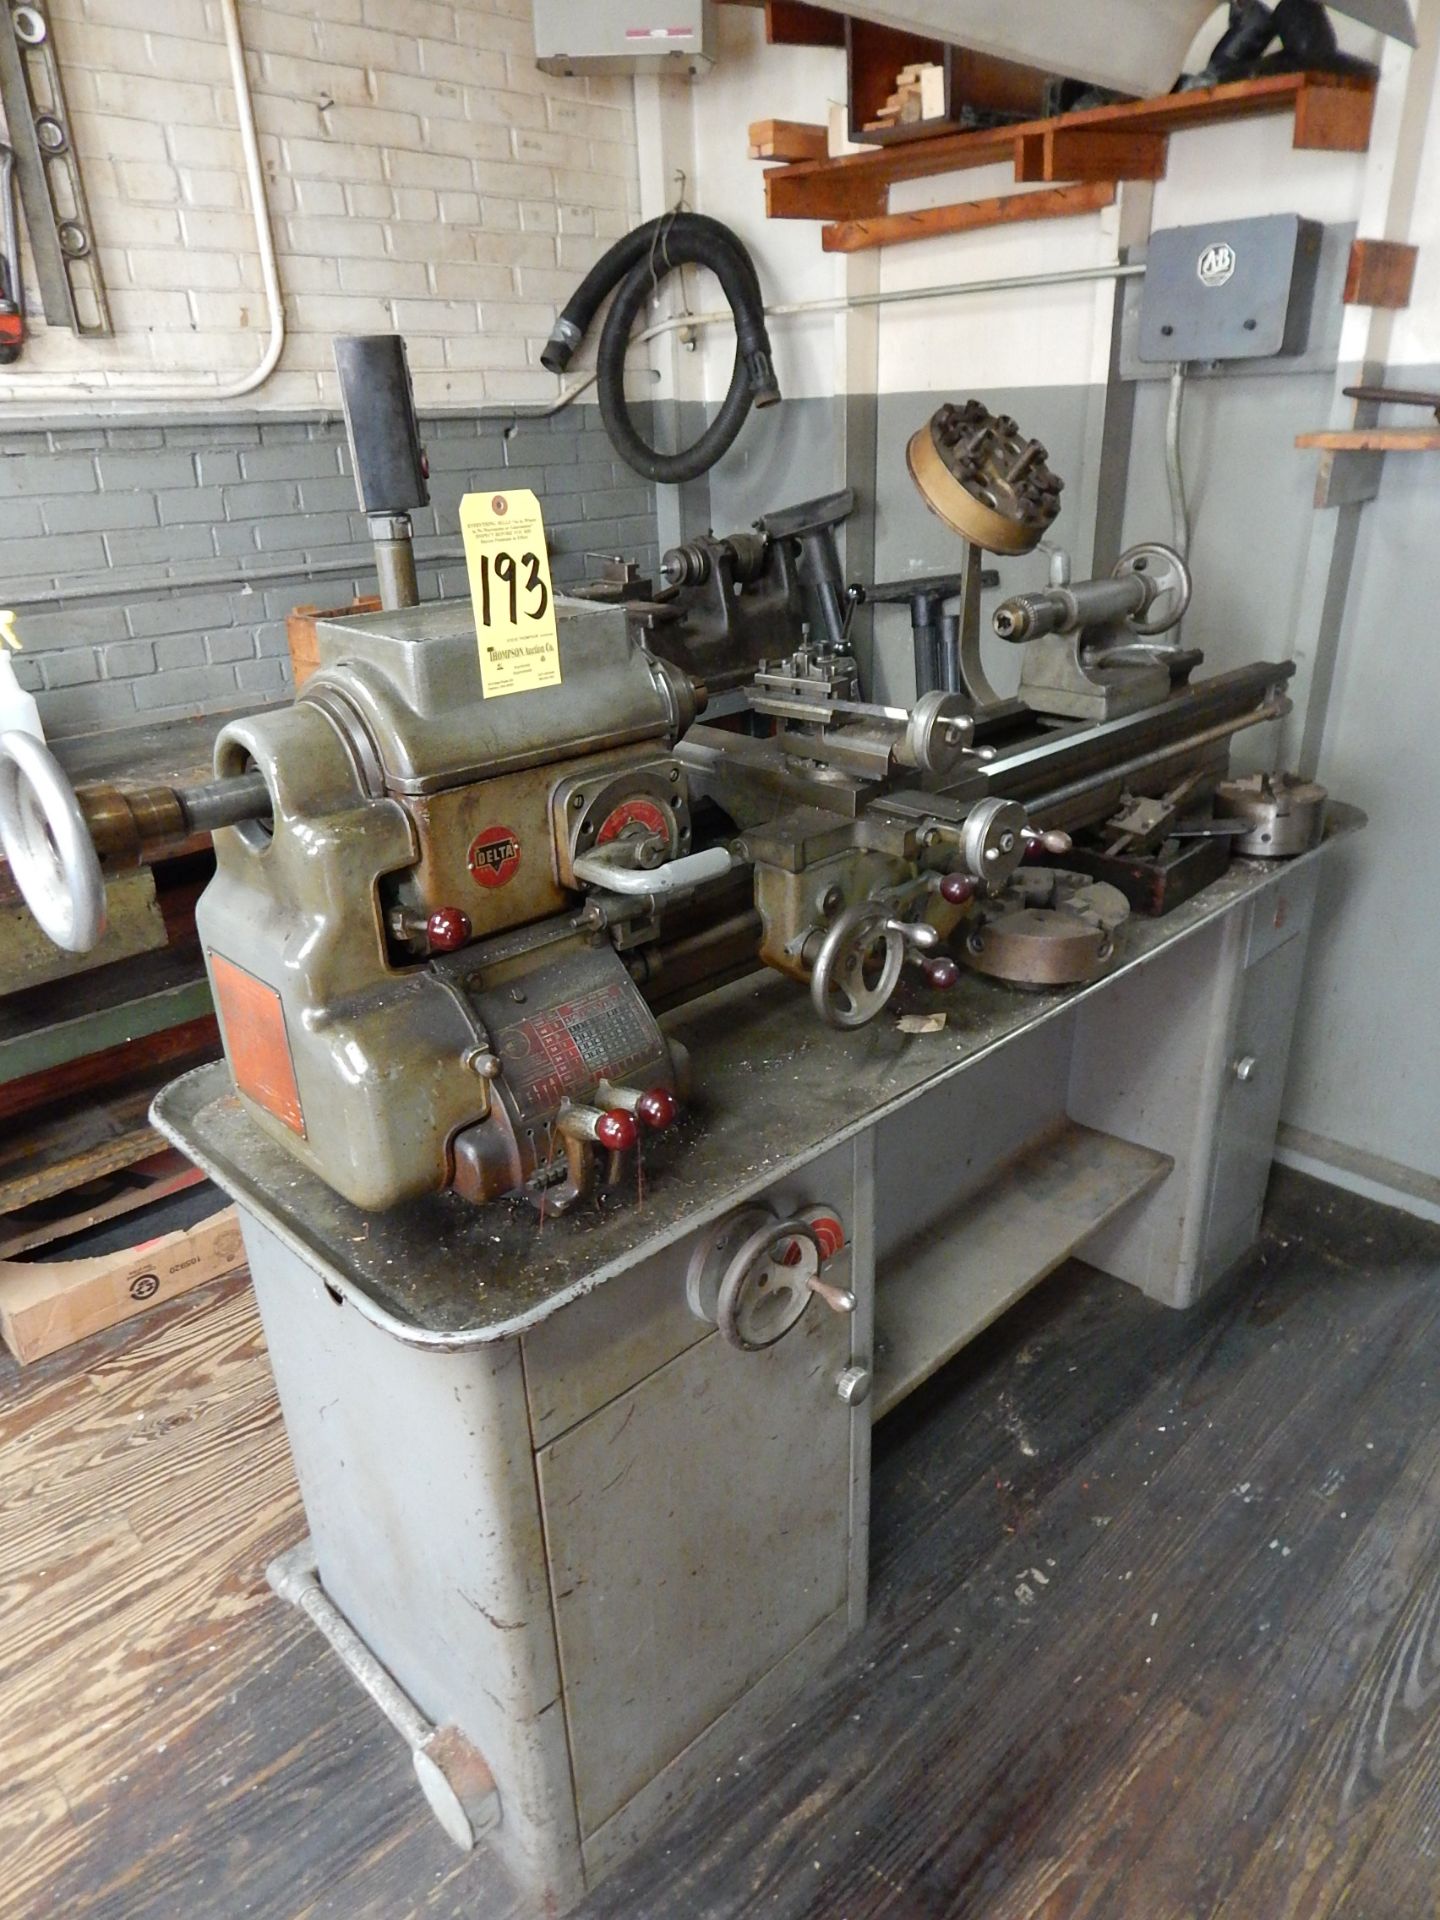 Delta 11" X 36" Tool Room Lathe, s/n 118-5627, Handwheel Collet Chuck and 5C Collets, 6 In. 3-Jaw - Image 2 of 4